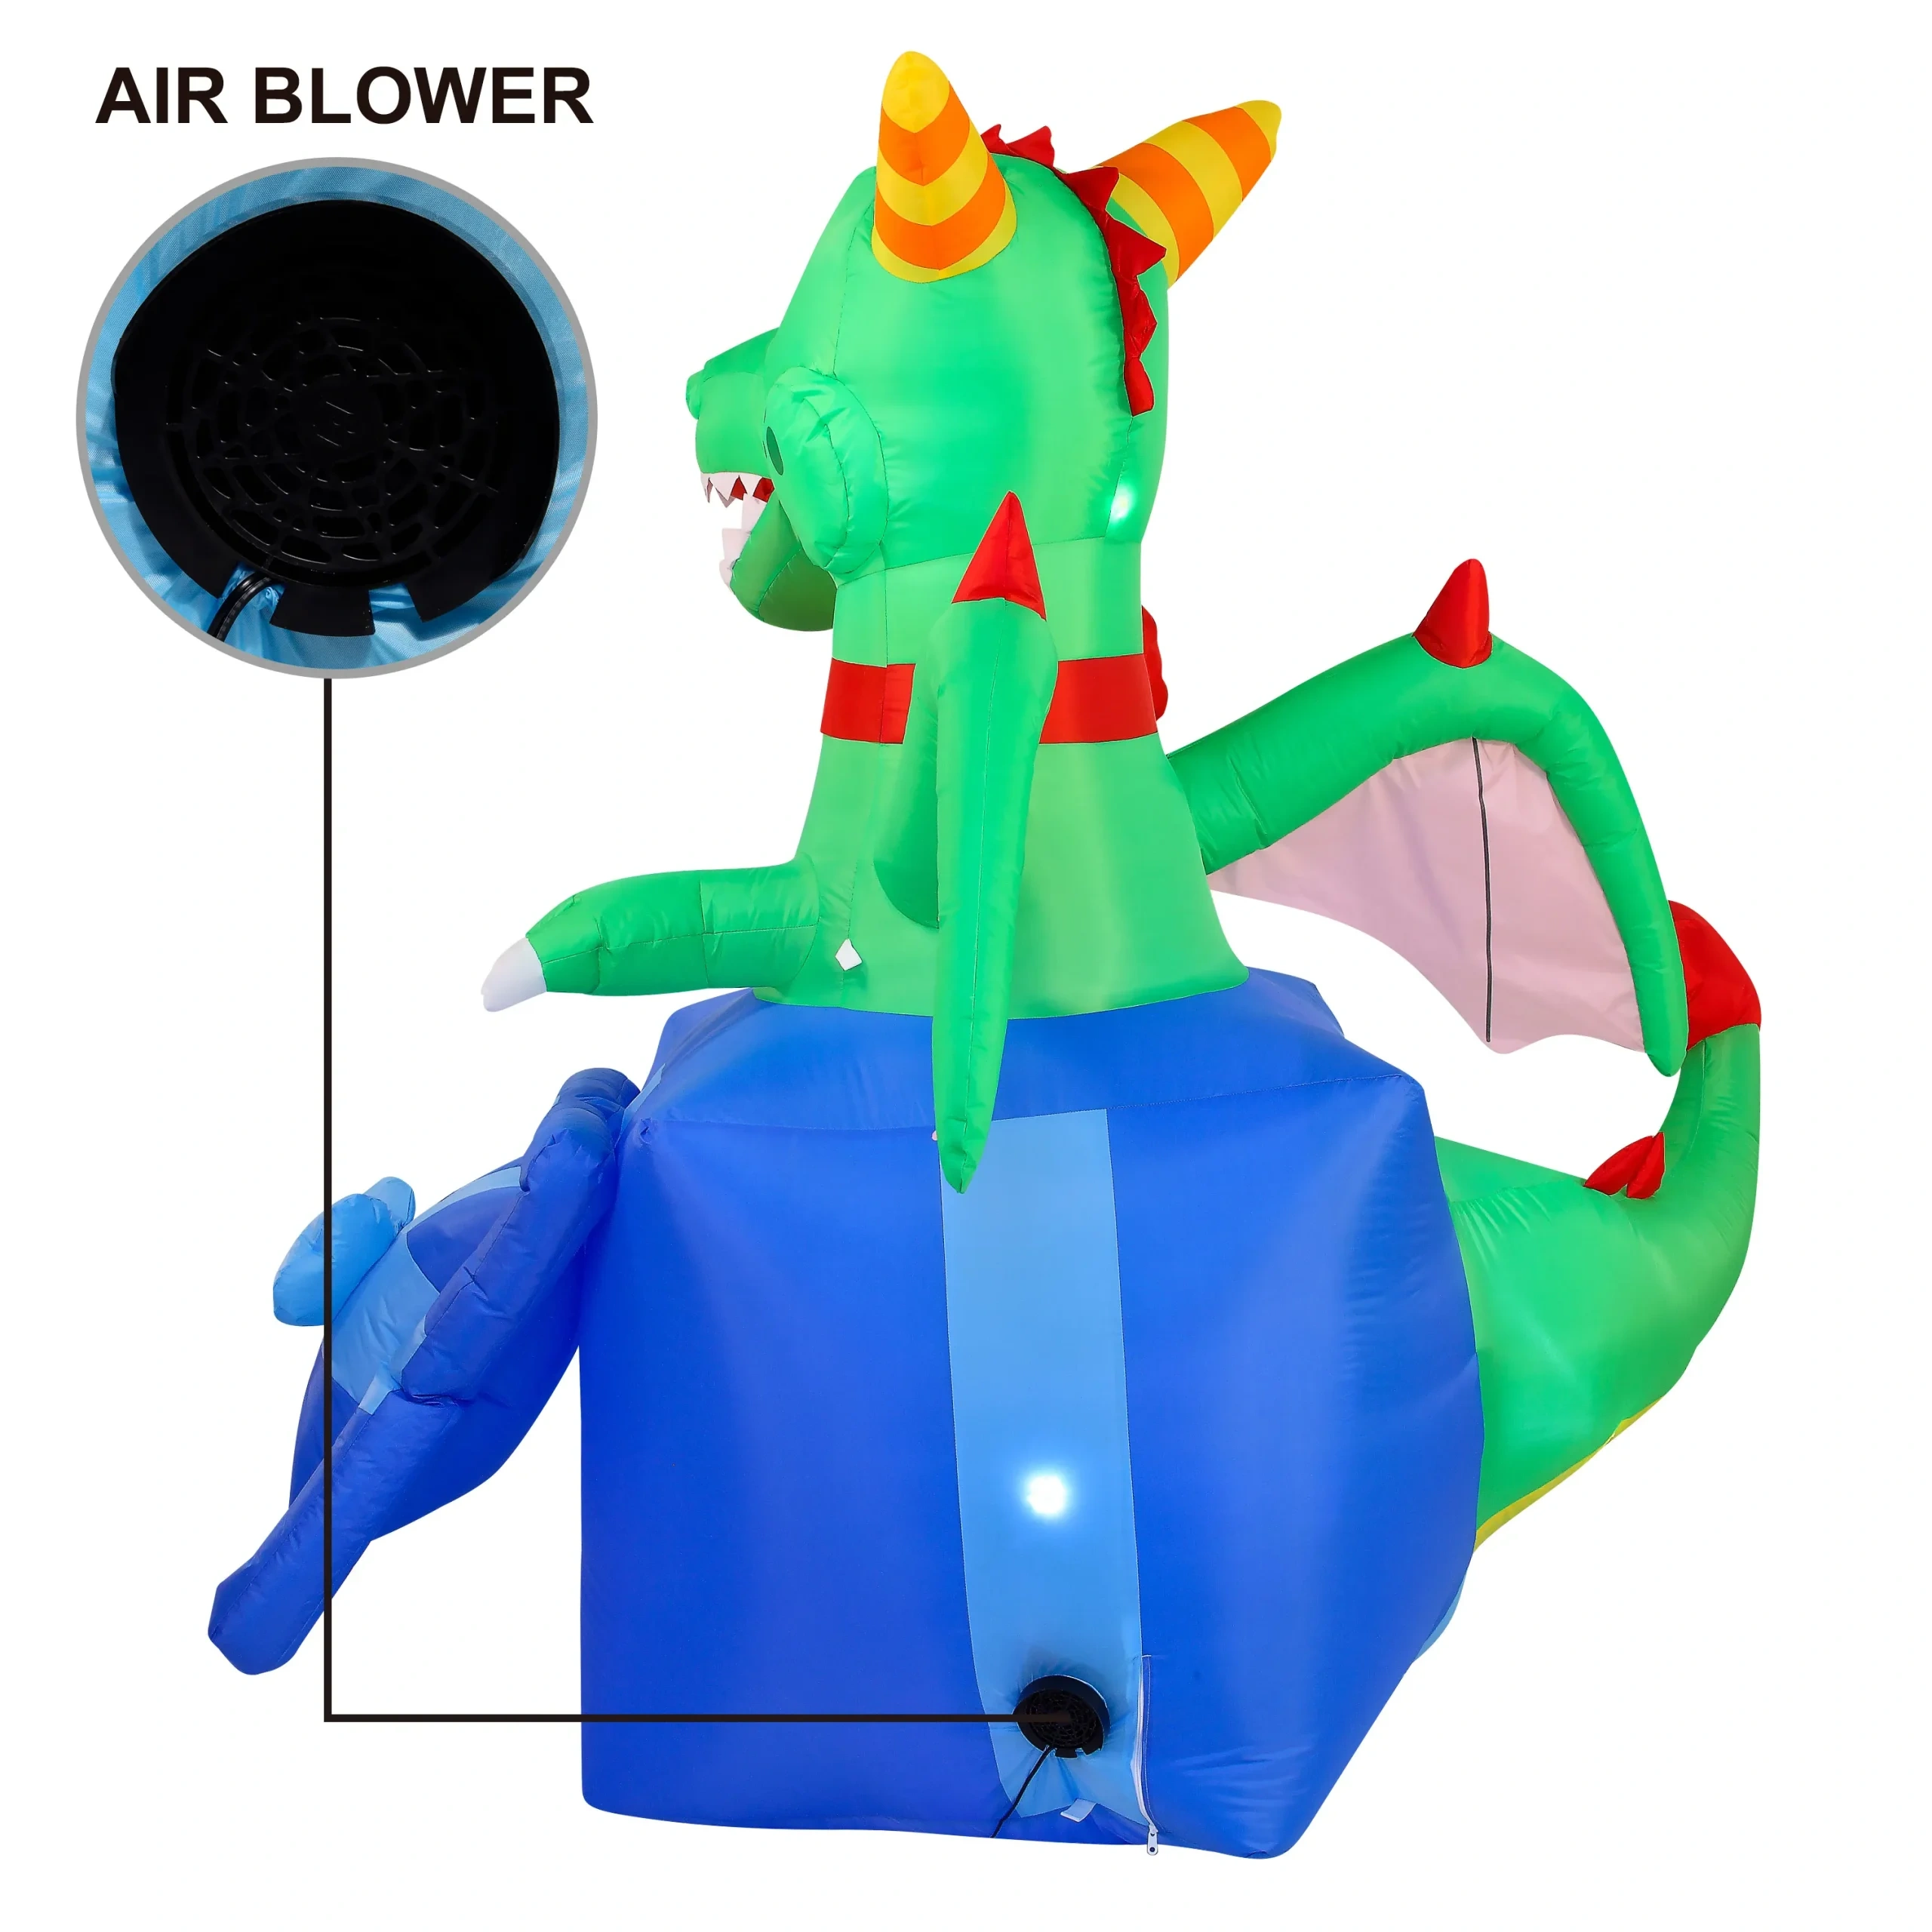 6ft Christmas Inflatable Dragon in A Gift Box